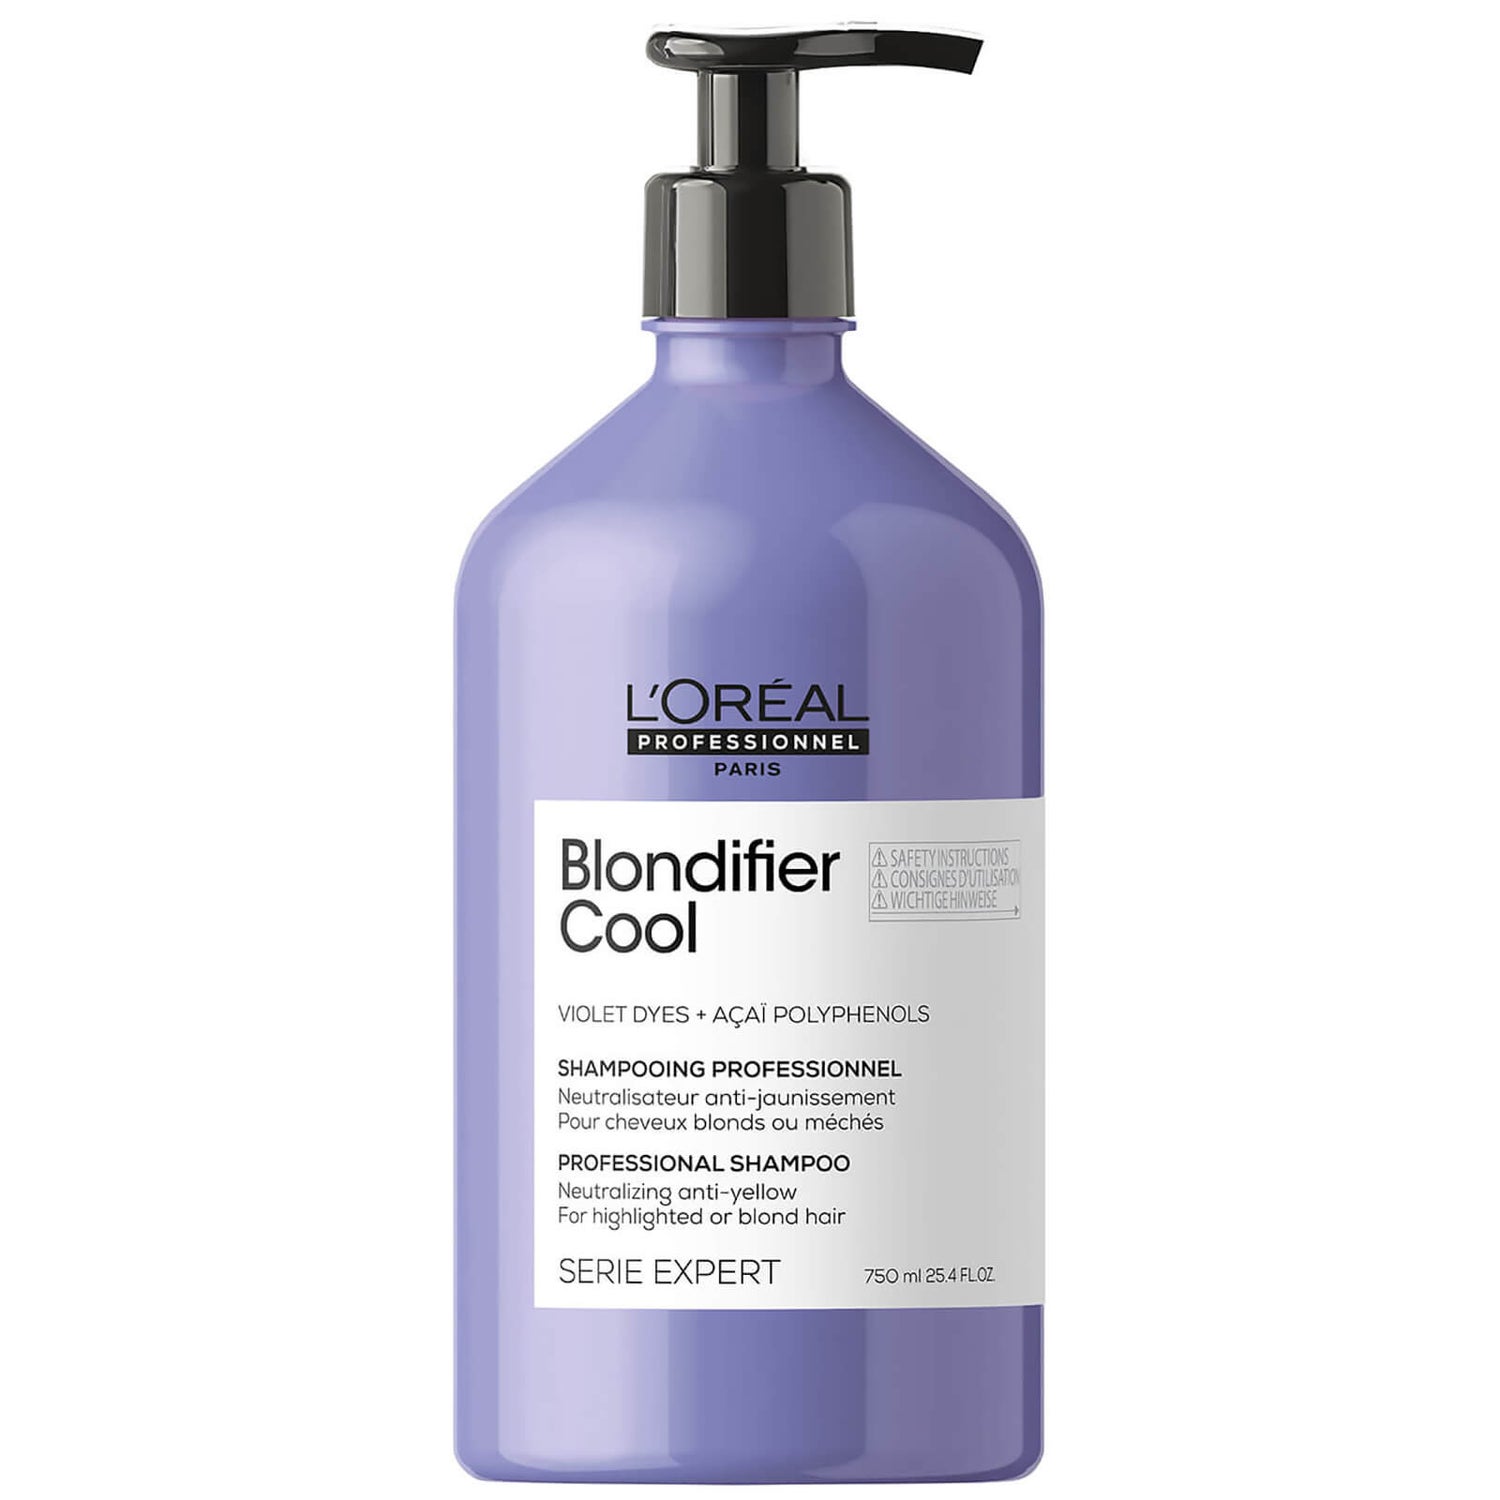 L’Oréal Professionnel Serie Expert Blondifier Cool Shampoo for Highlighted or Blonde Hair 750 ml